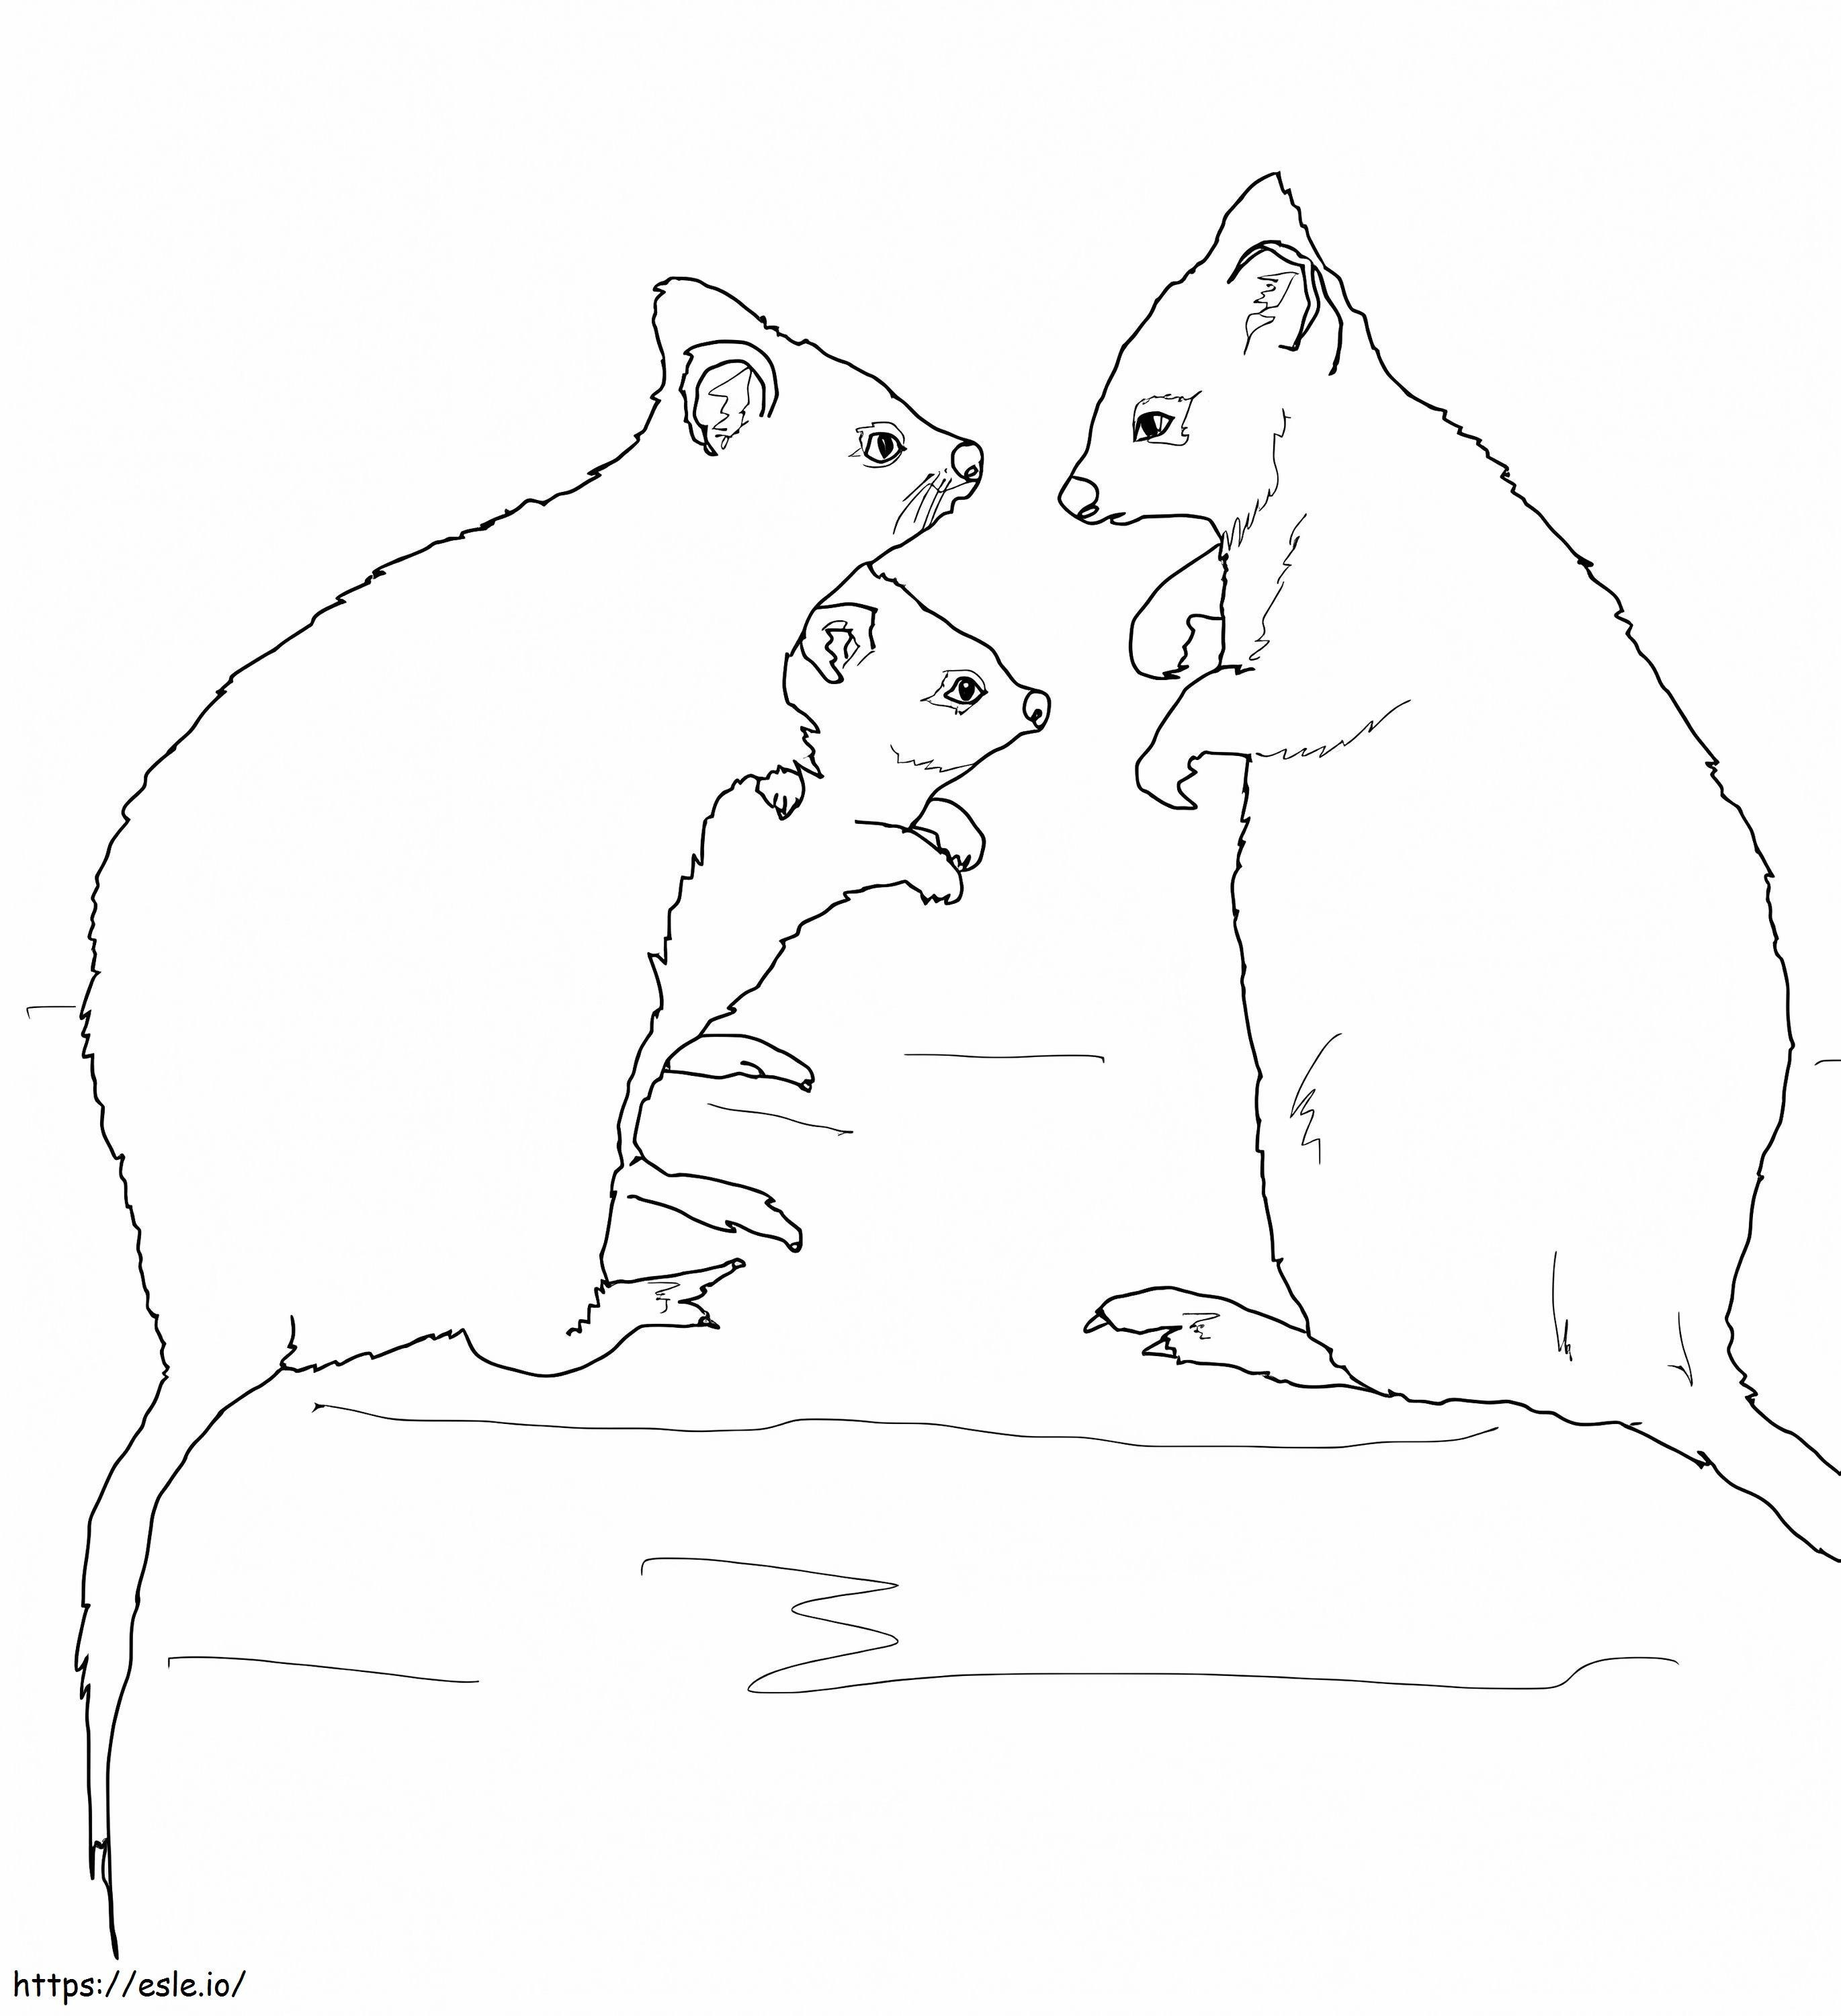 Quokka Family coloring page